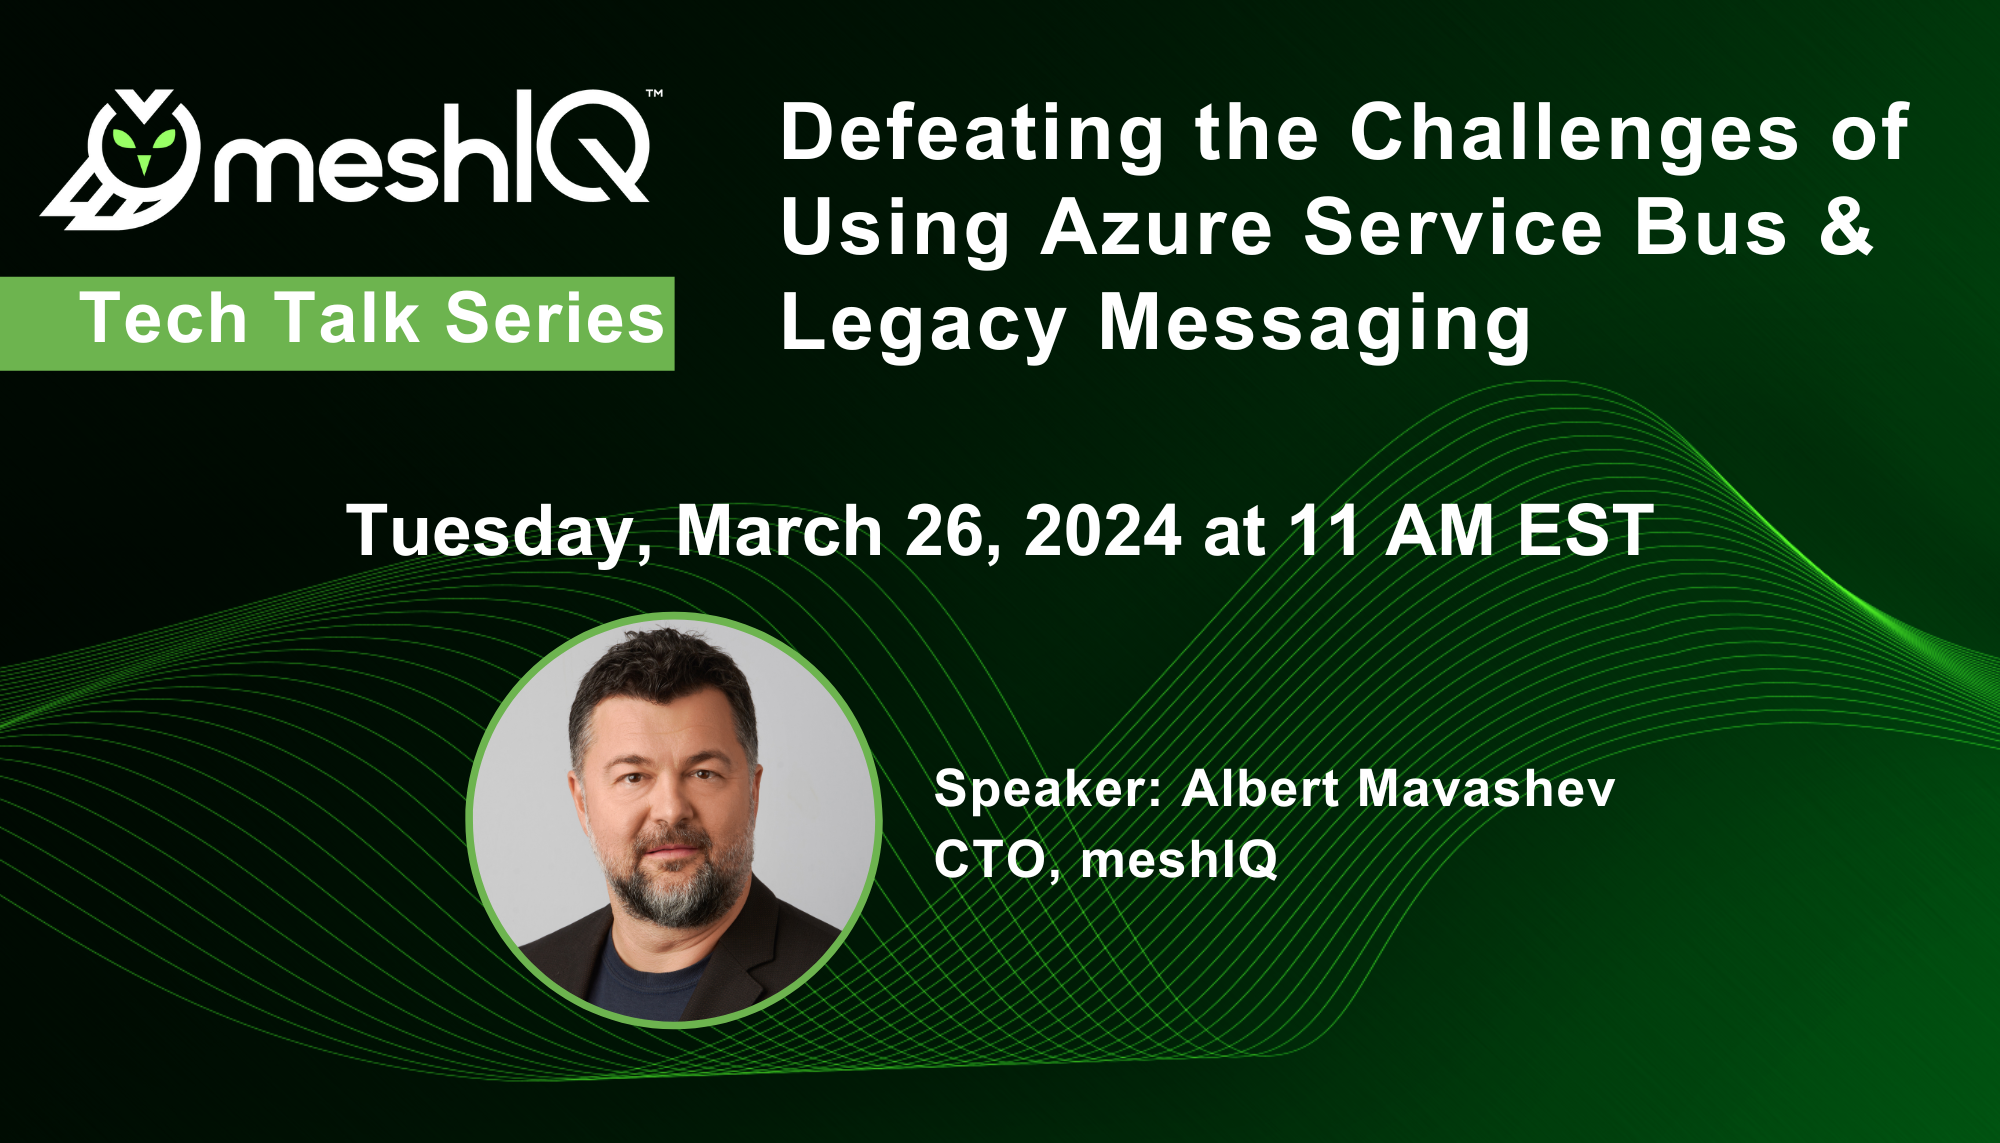 Defeating the Challenges of Using Azure Service Bus & Legacy Messaging